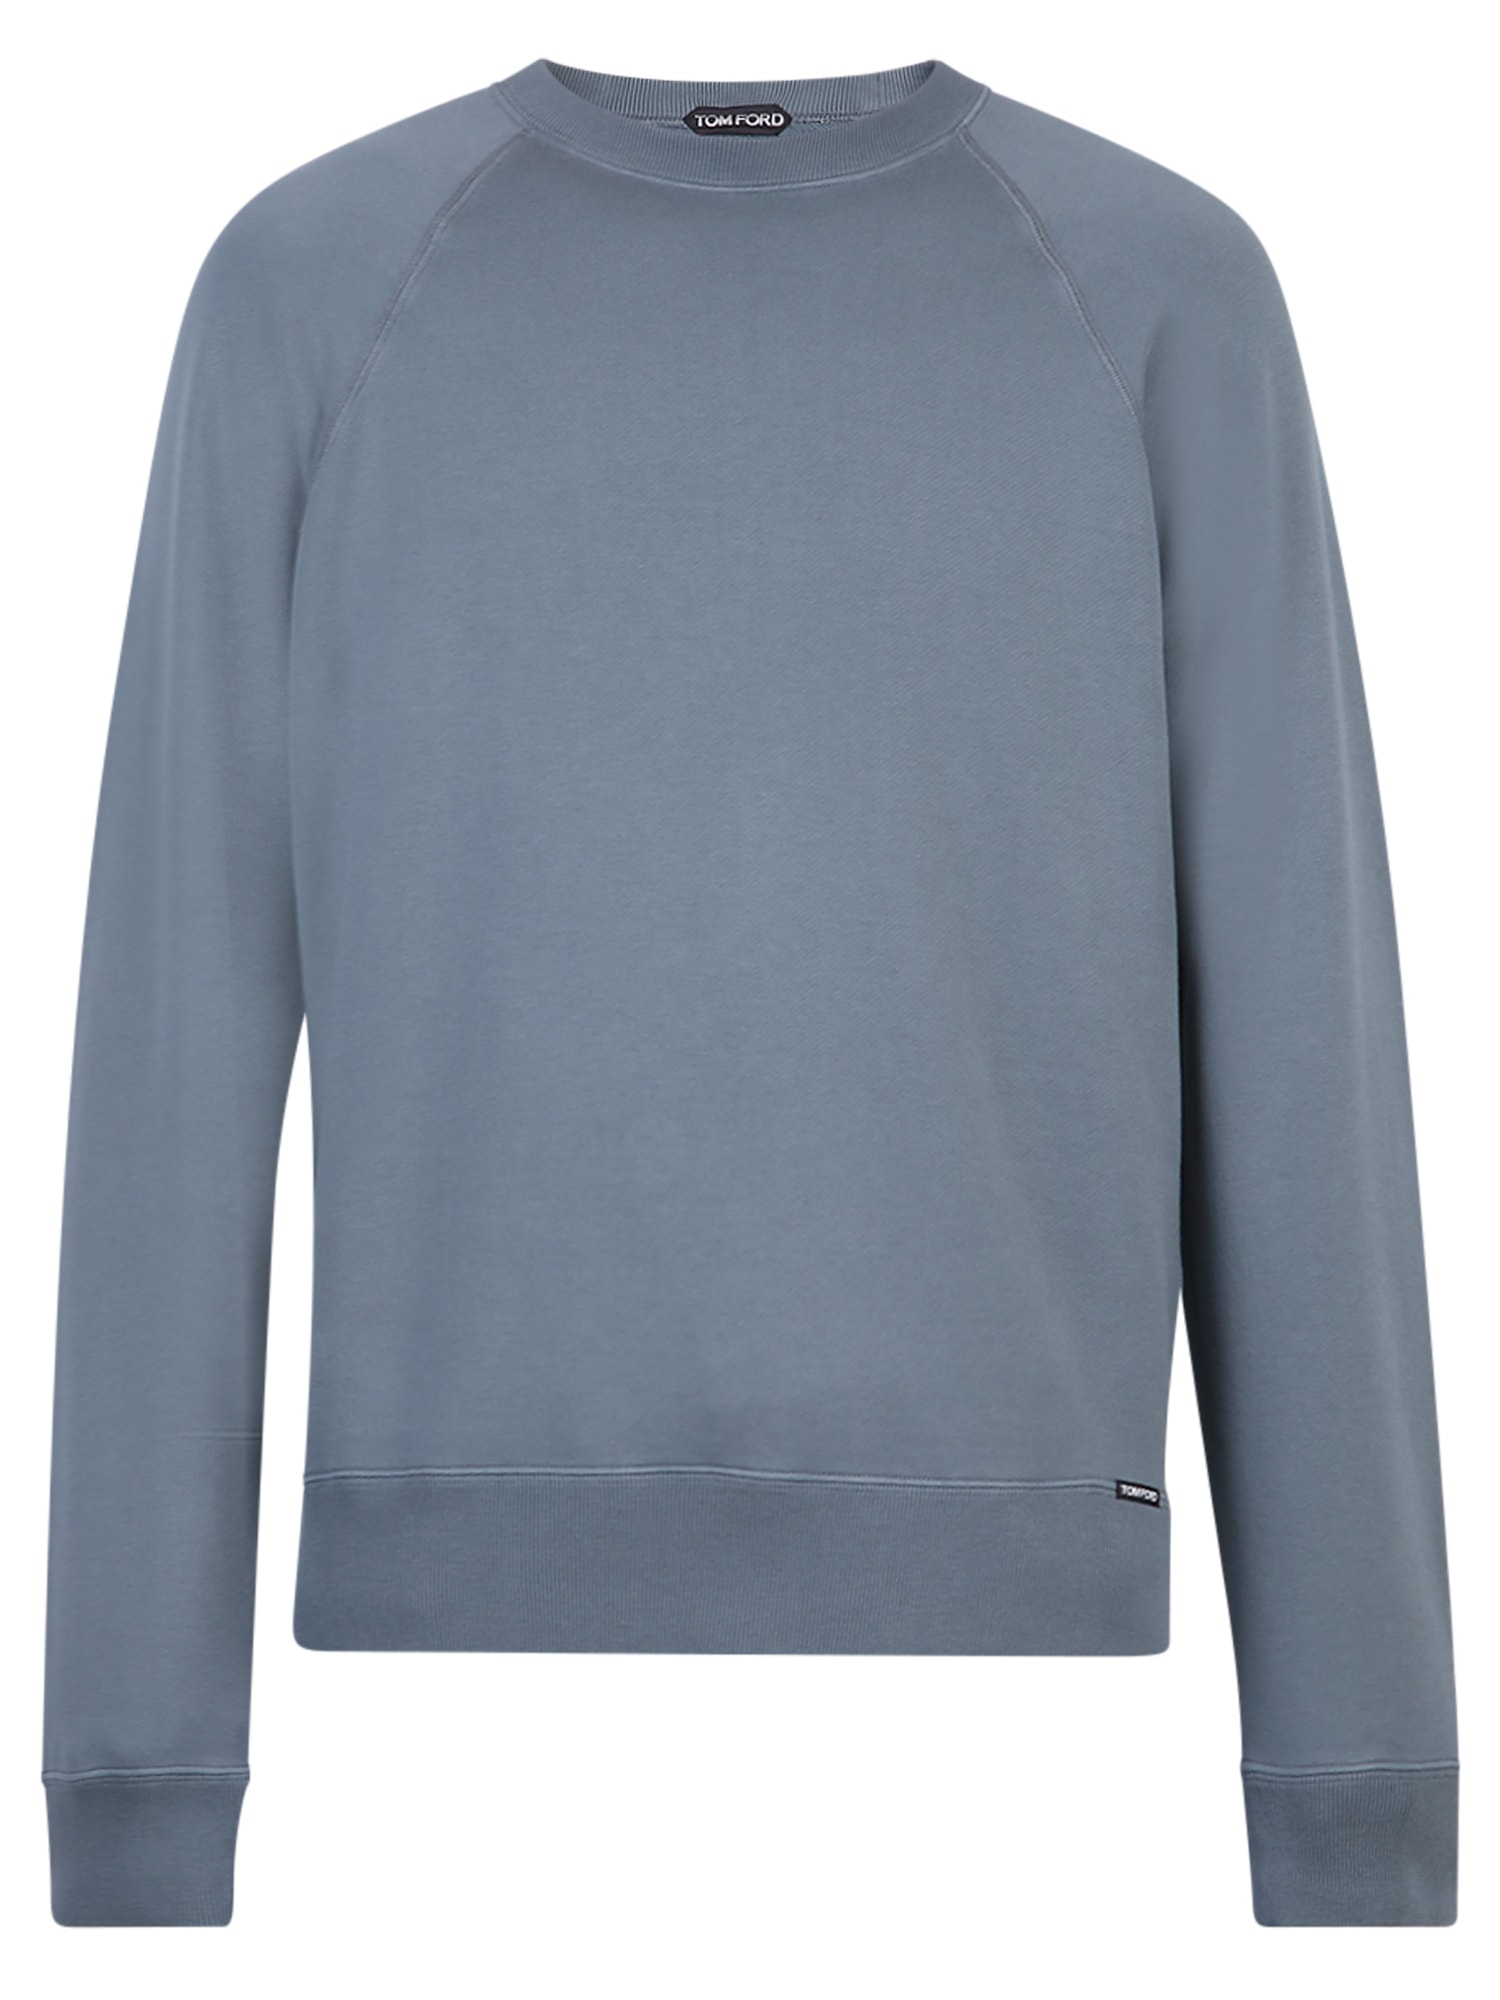 TOM FORD RELAXED FIT SWEATSHIRT,BW265 TFJ985 T07